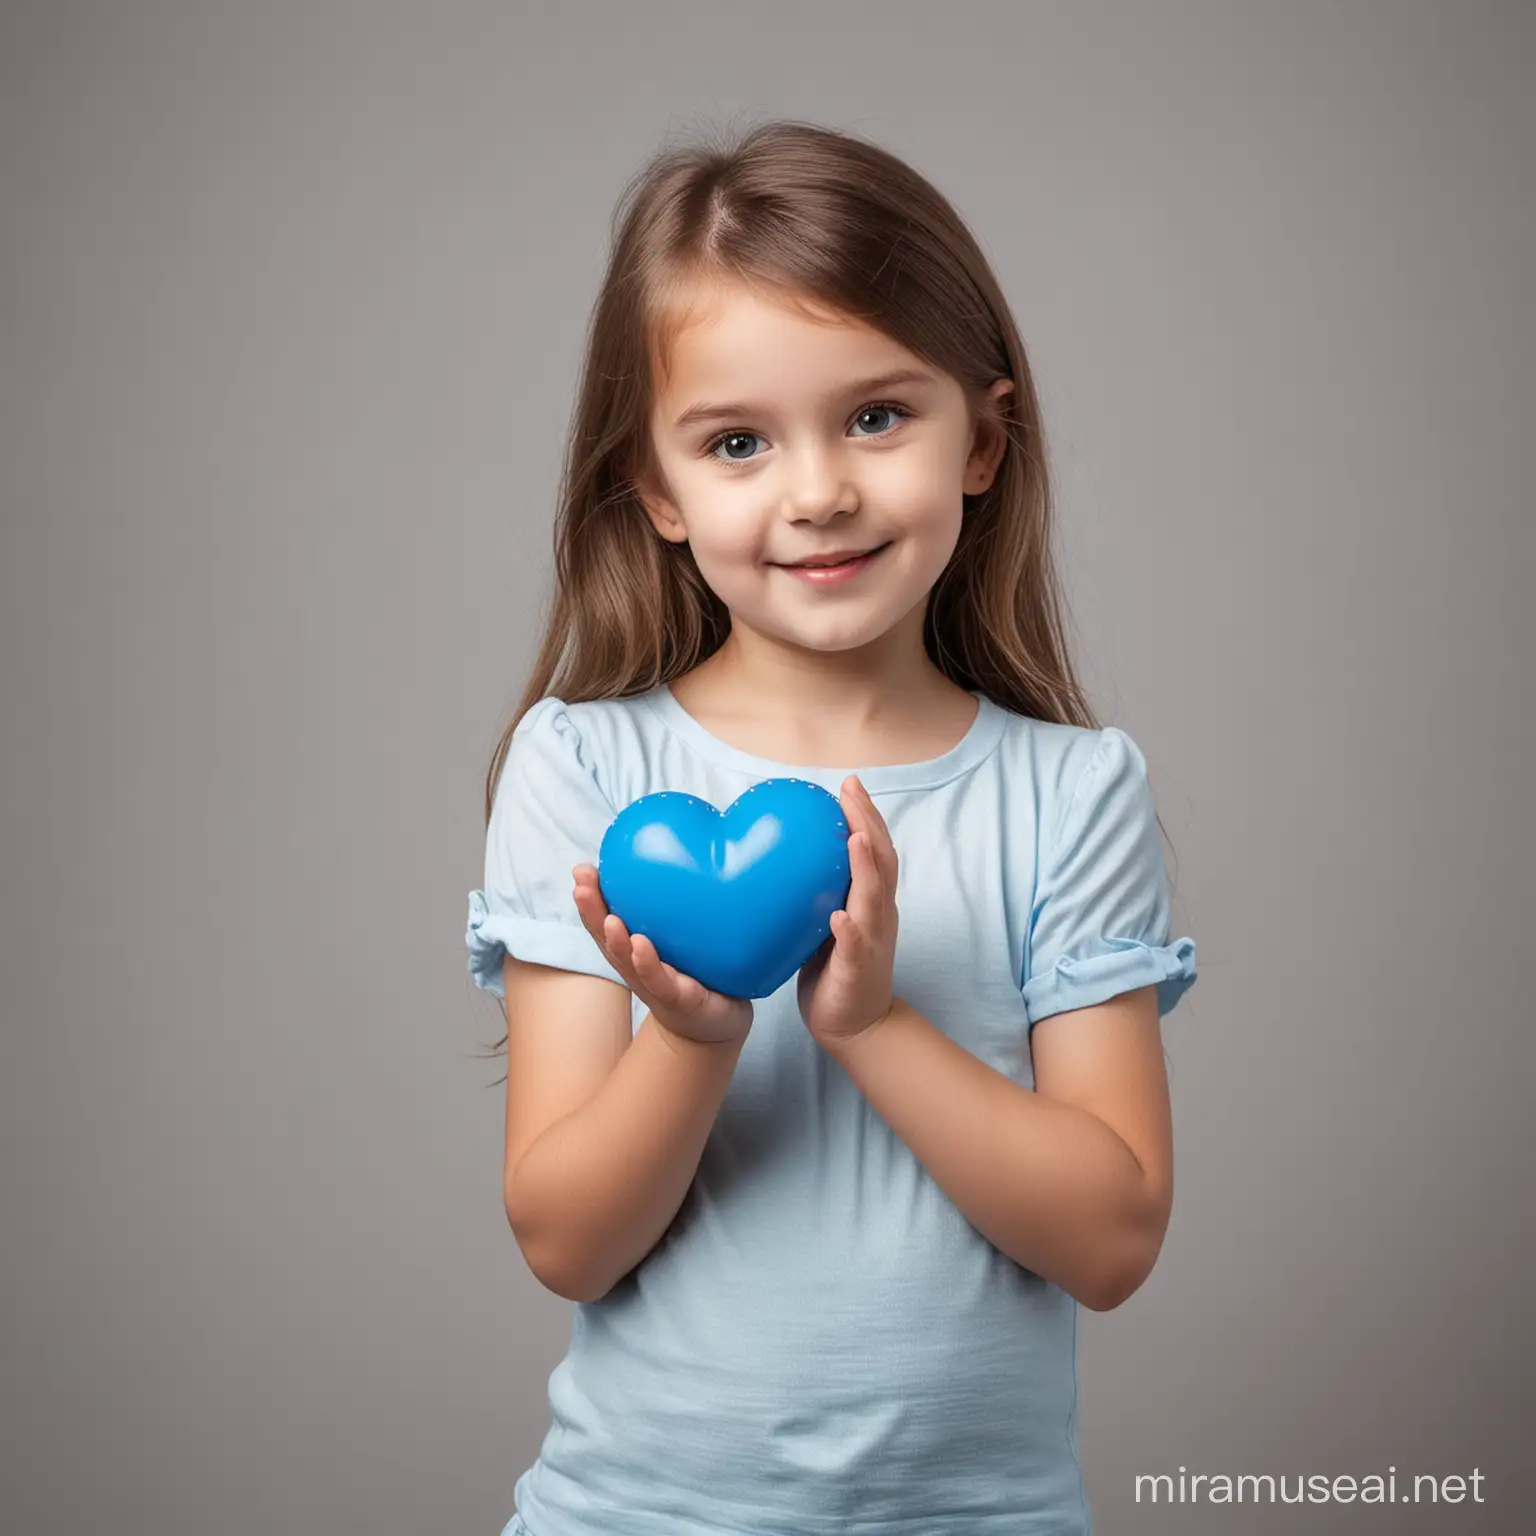 Little girl holding with both hand a blue heart